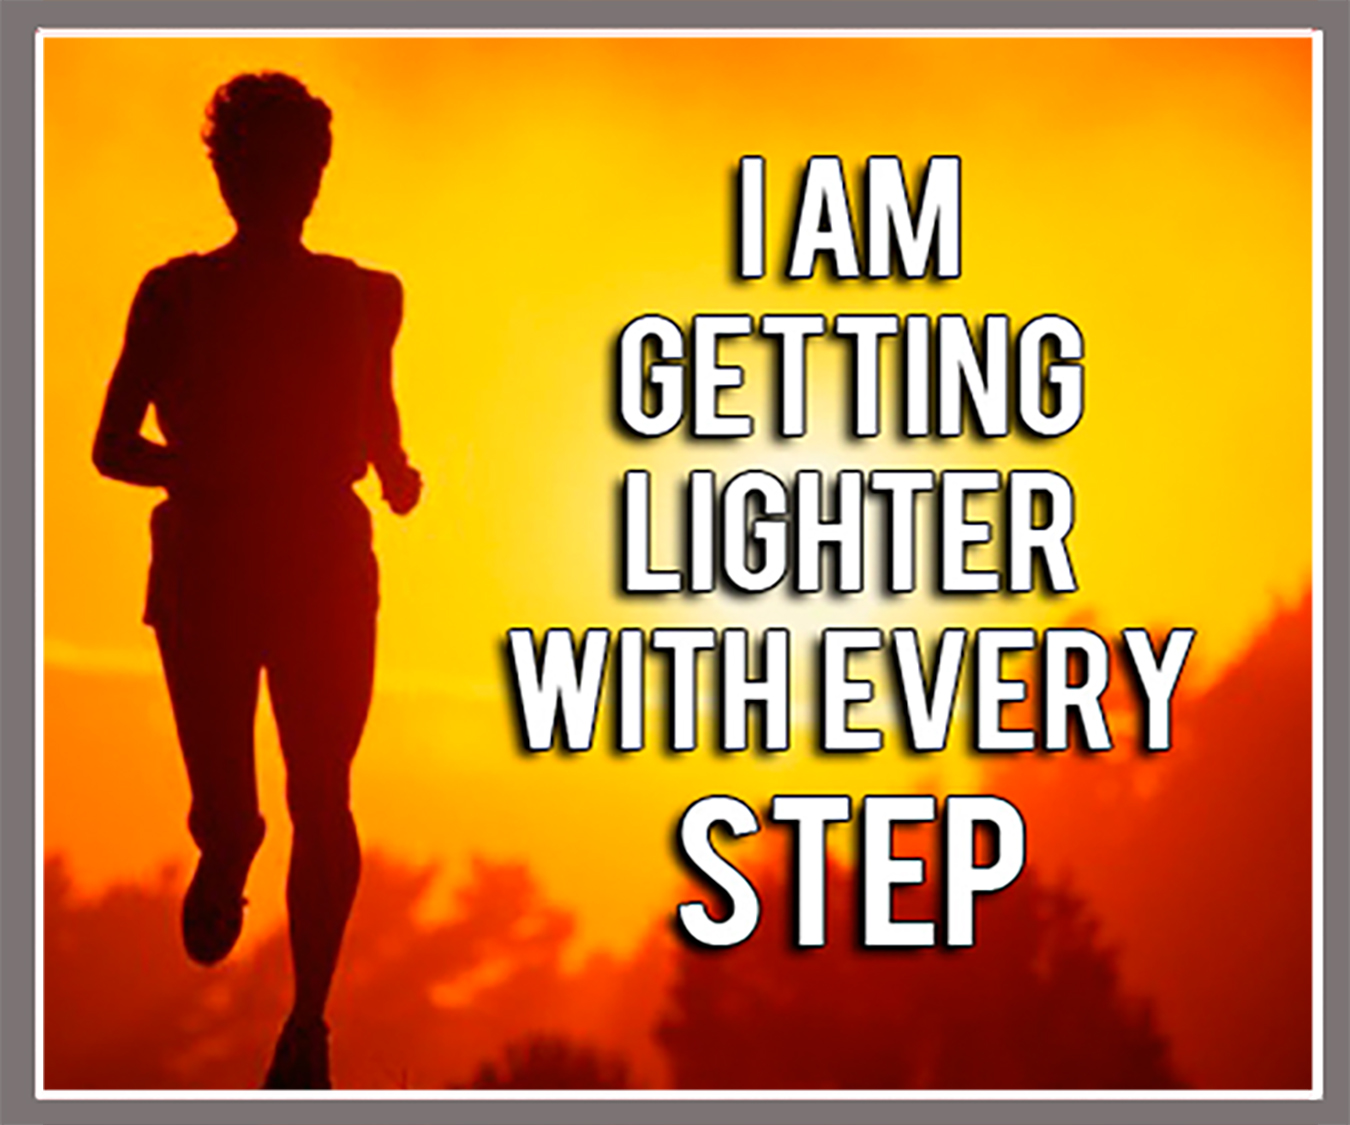 Every Step - Living Fit Lifestyle